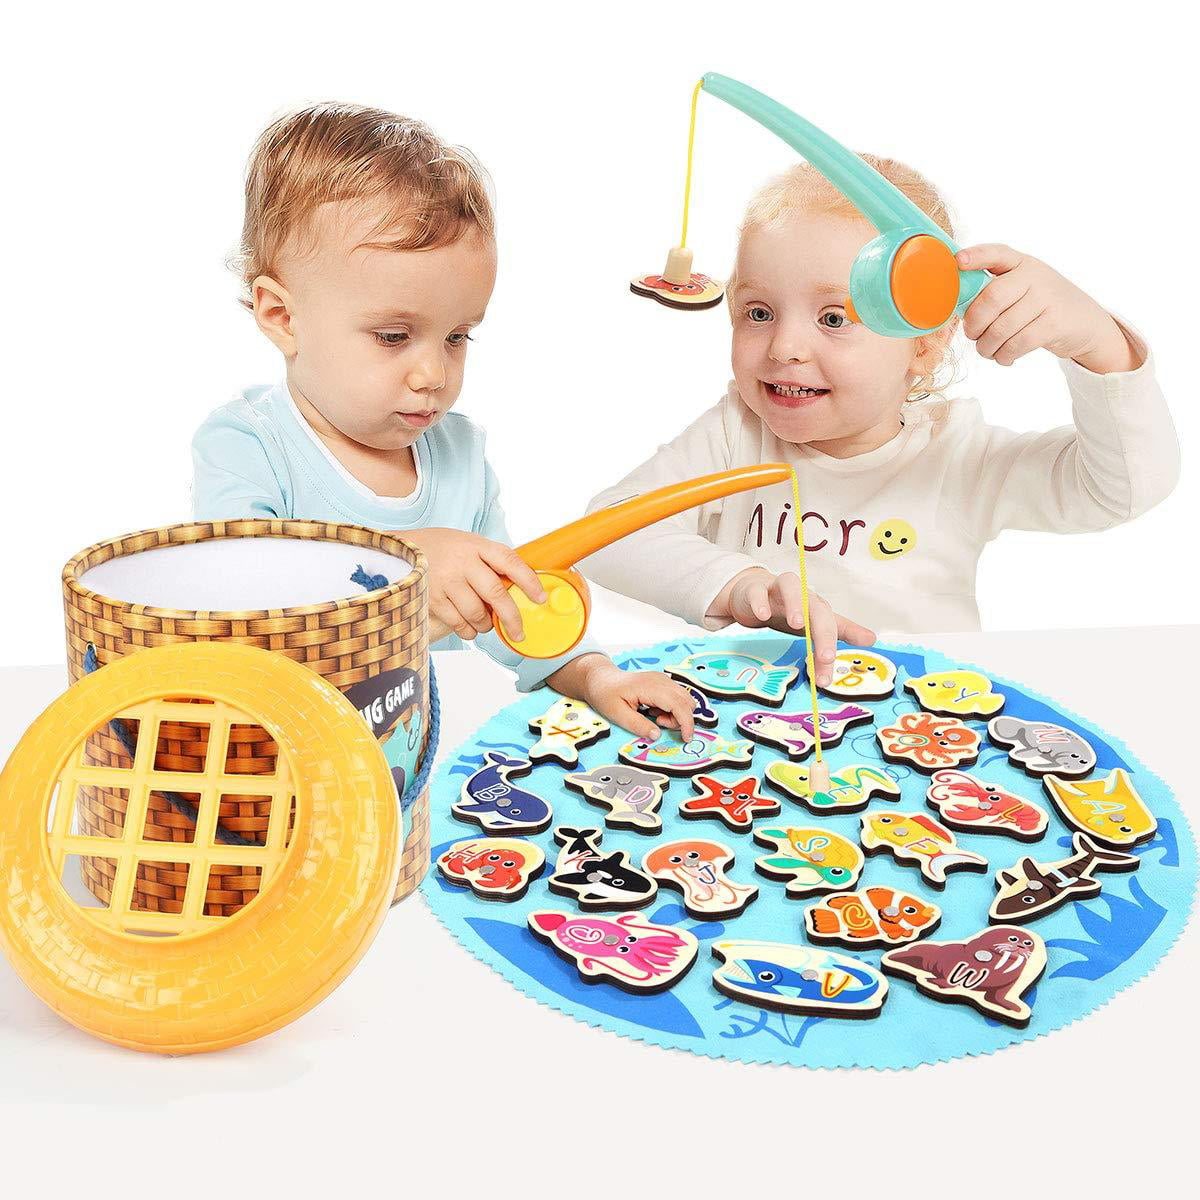 Wooden Magnetic Fish Toys Kids Educational Fishing Magnet Puzzle Game Gifts UK 